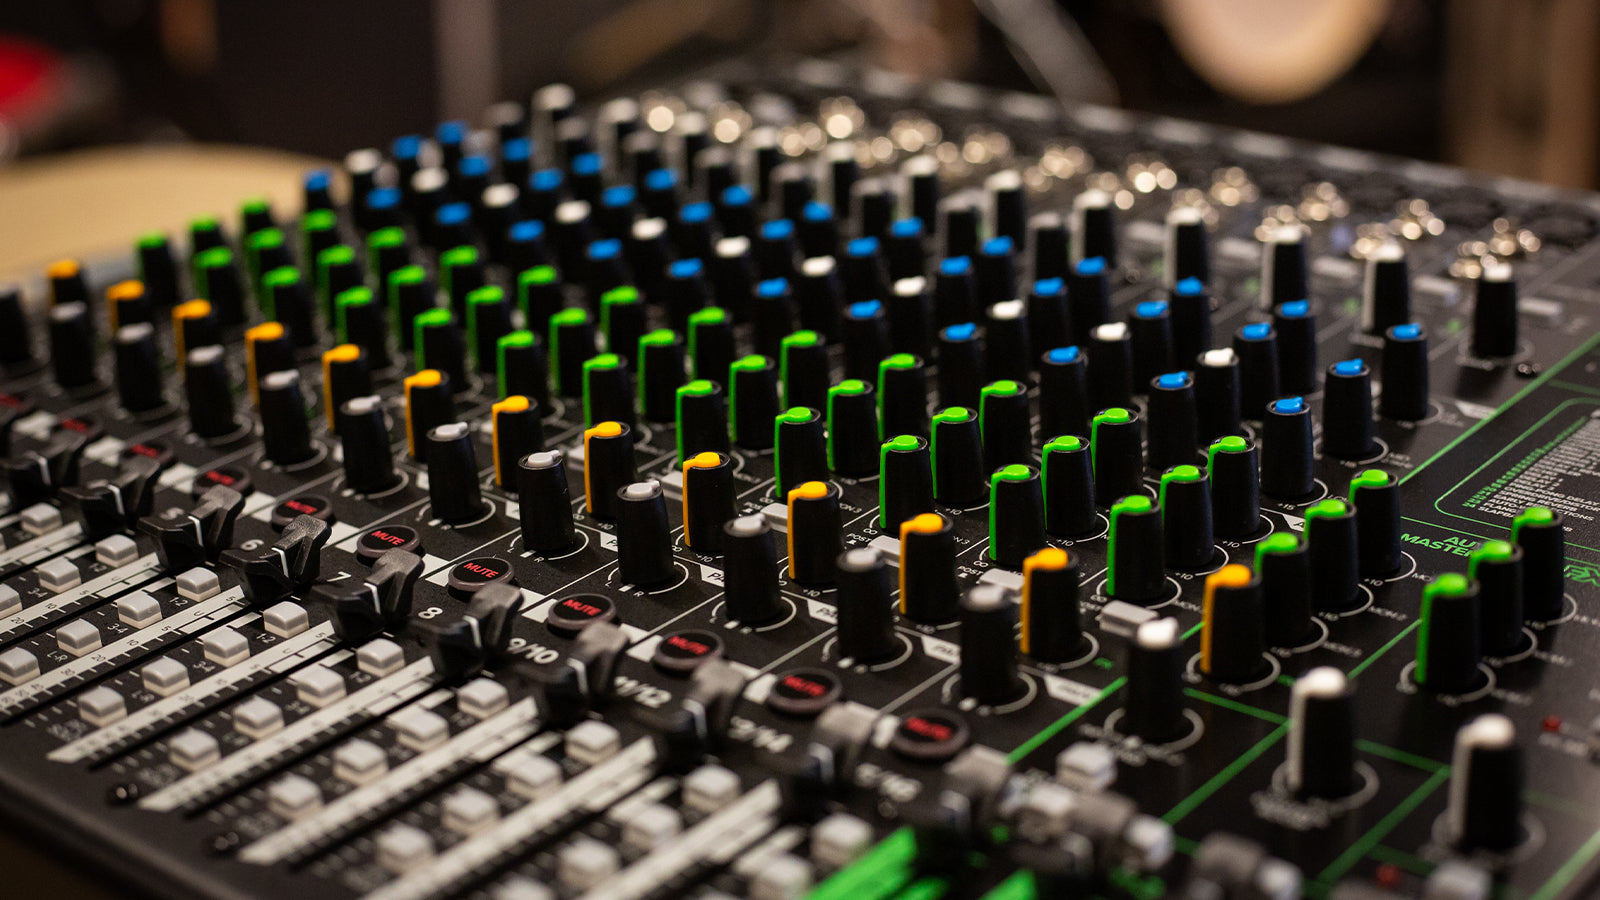 A Mackie mixer in a studio setting